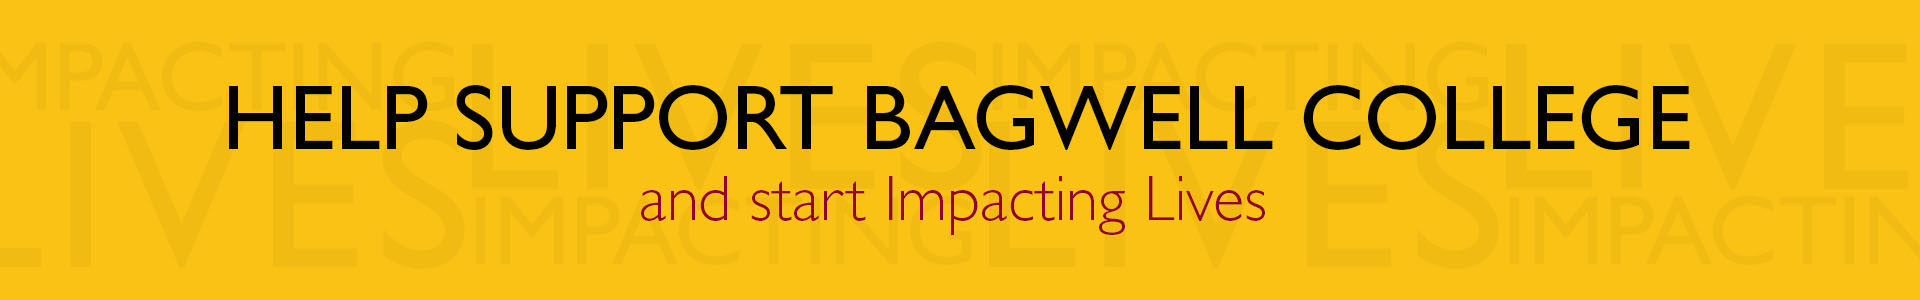 Teaching Grants for Bagwell College